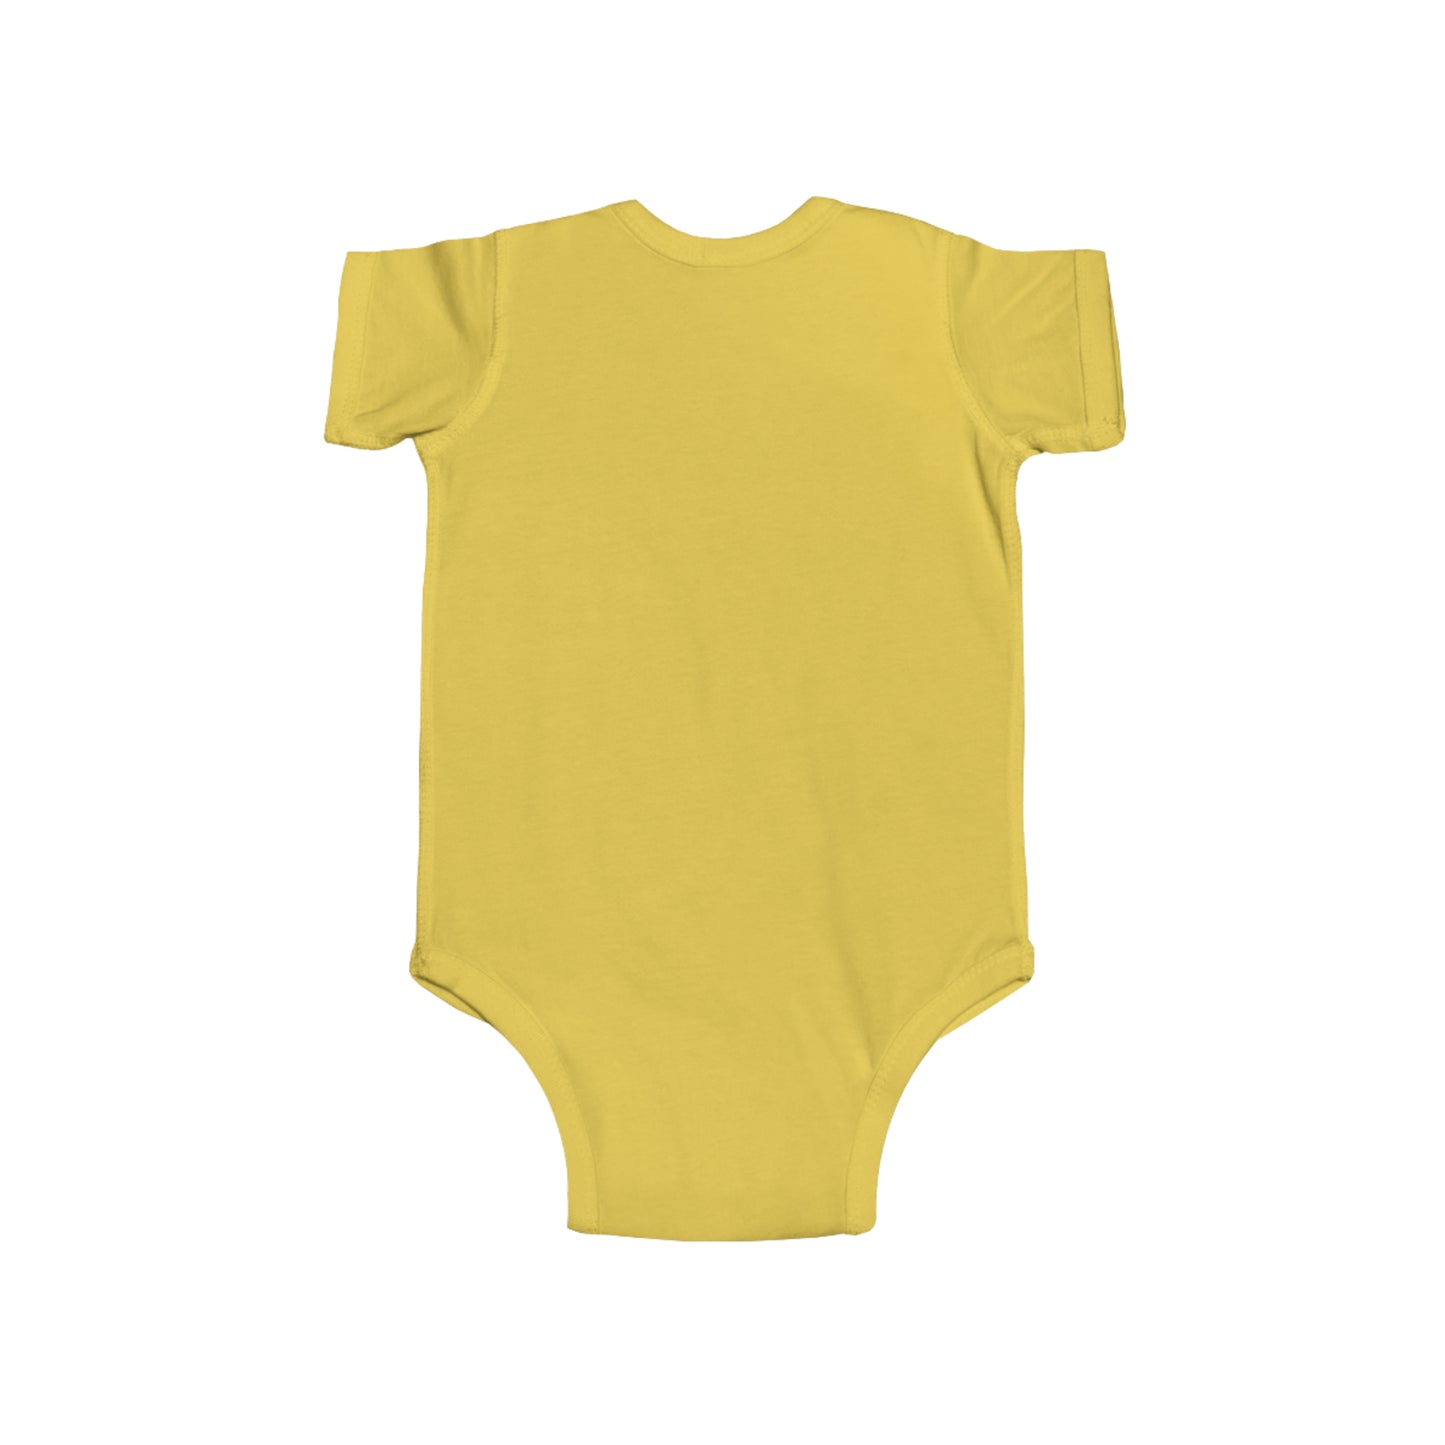 Every Party Has a Pooper Infant Fine Jersey Bodysuit